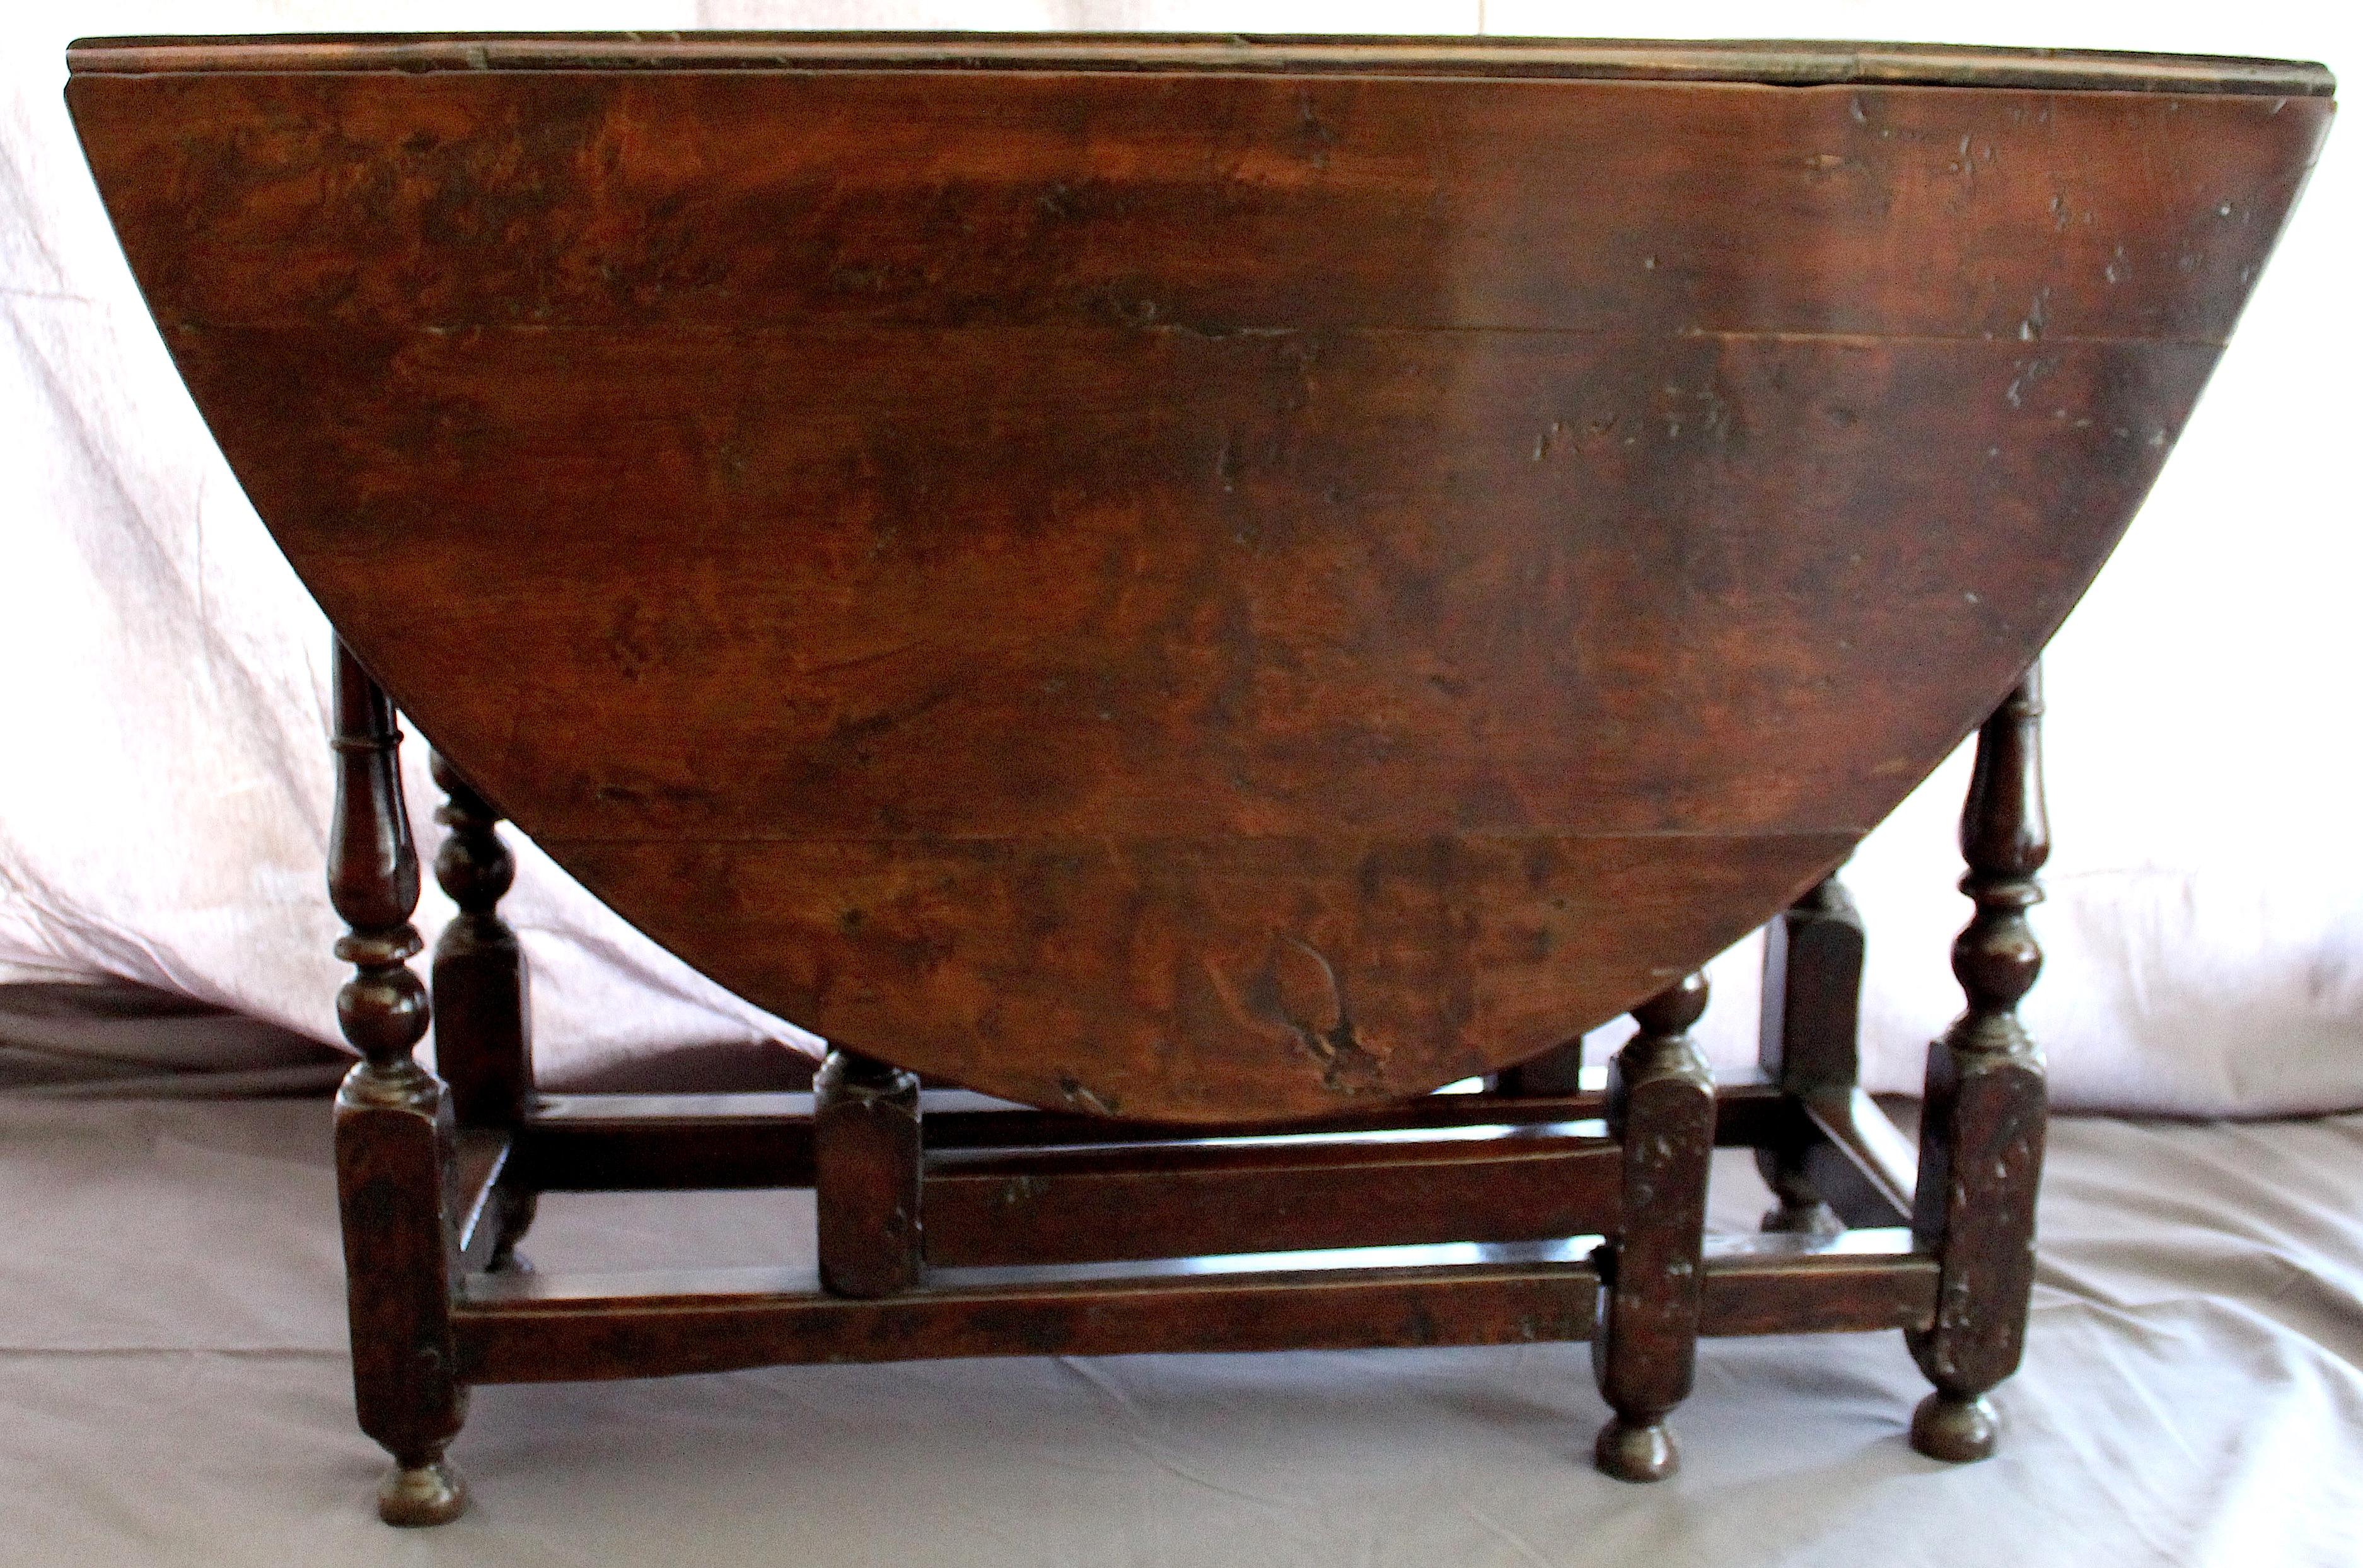 English walnut hate leg table, circa 1685
A beautiful example of early English furniture with lovely color, beautiful ageing and with centre panel two drop leaves and carved folding legs beneath.